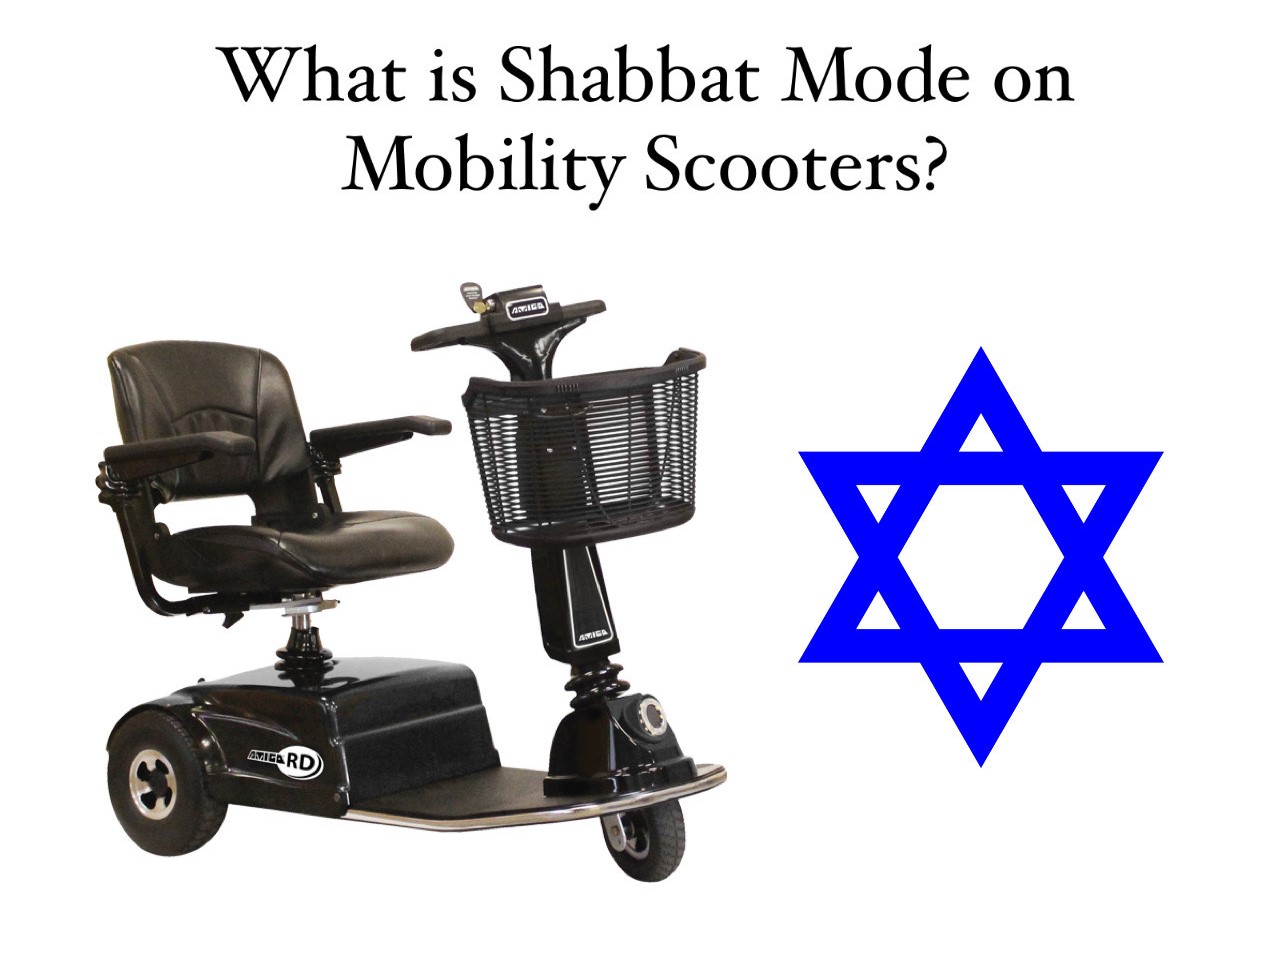 What is shabbat mode on mobility scooters?